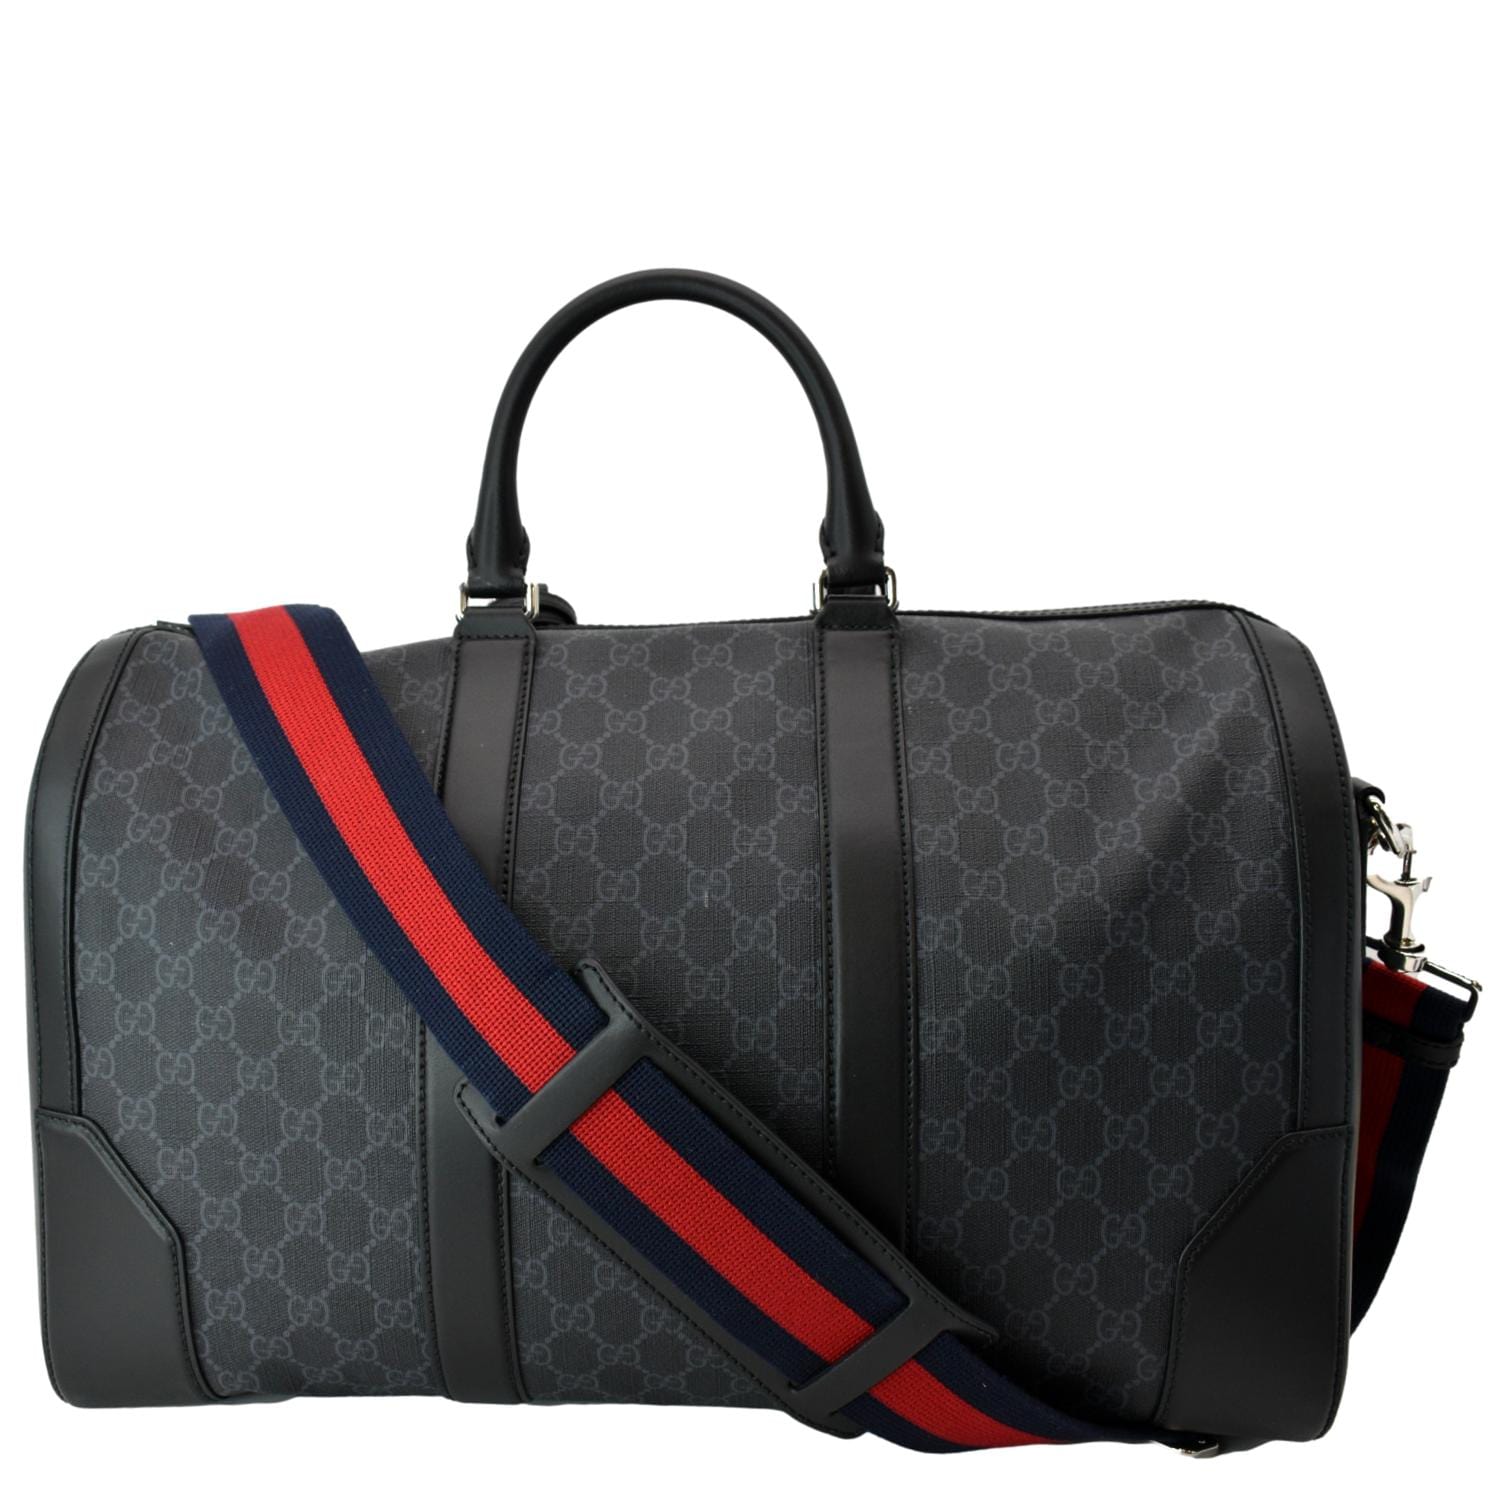 Sold at Auction: Gucci Speedy Bag